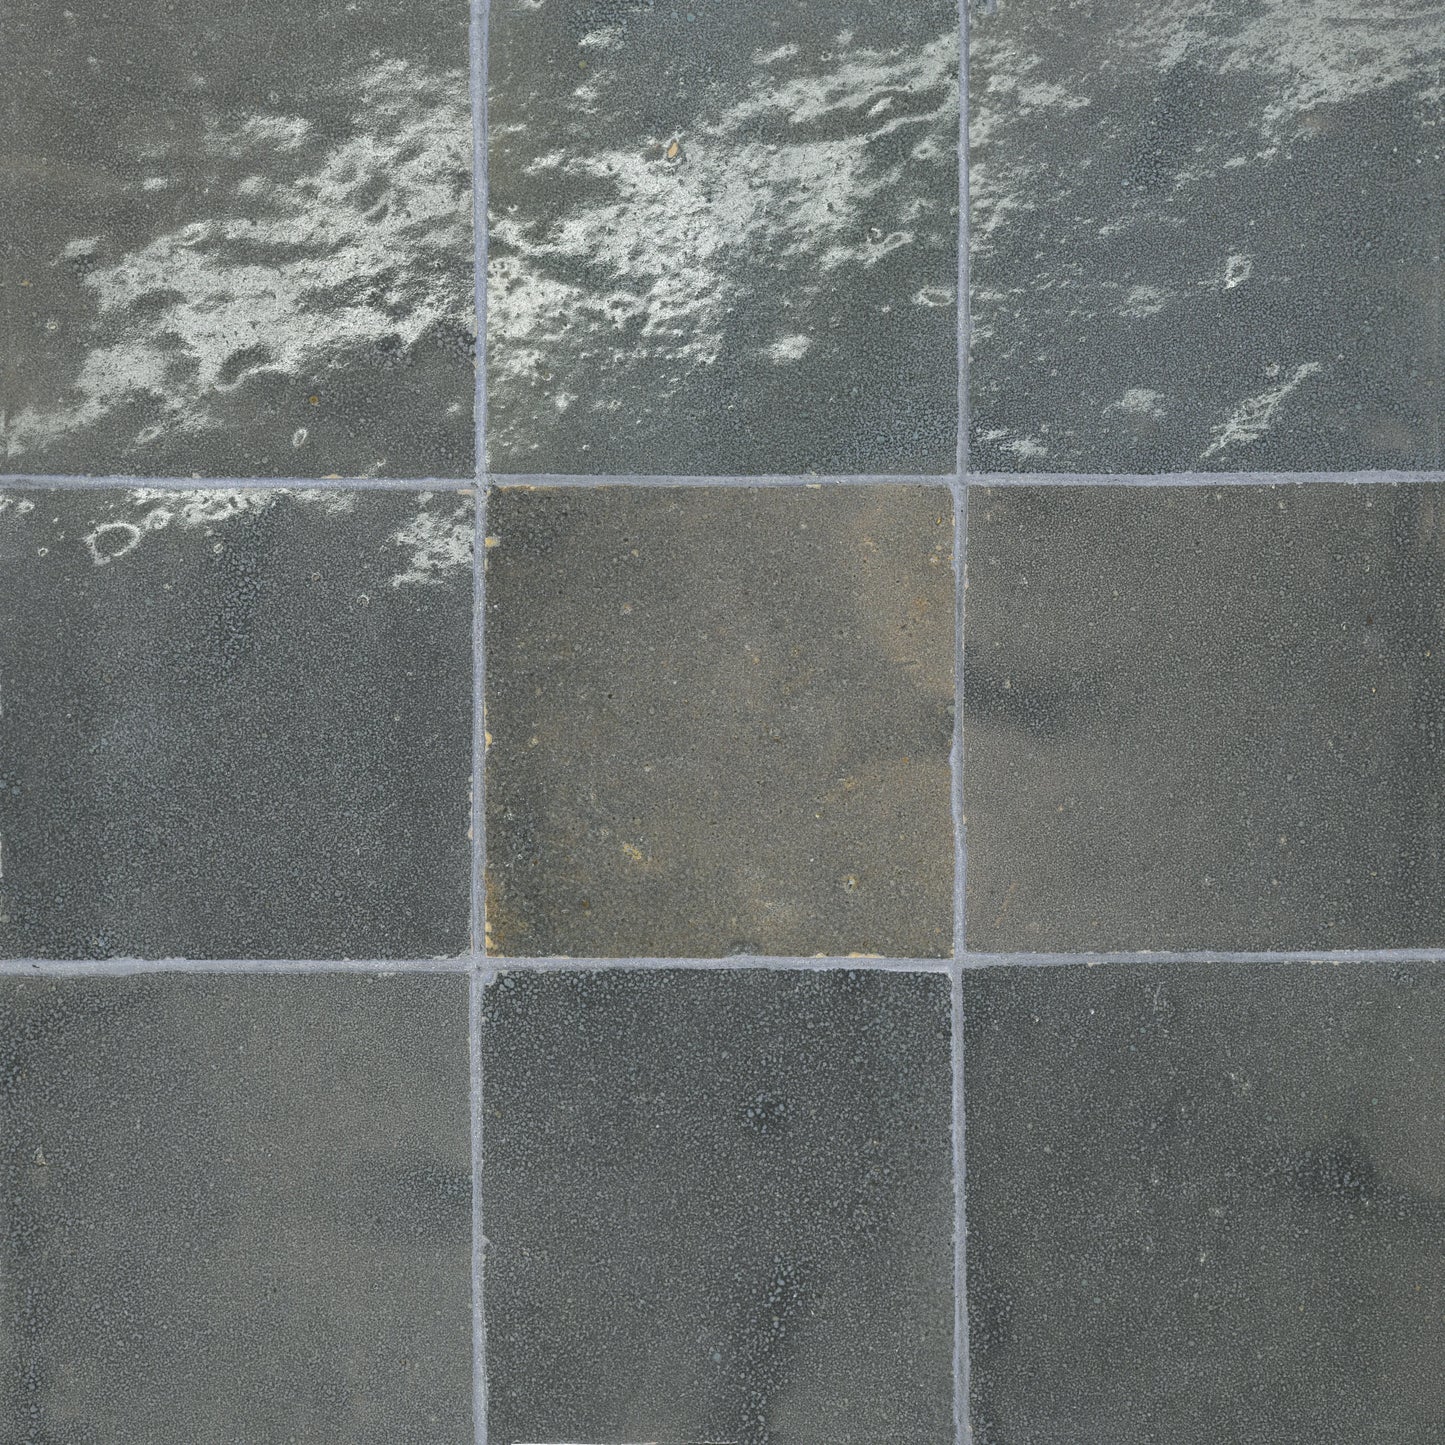 Tunis Zellige Tile Glossy in Graphite 4" x 4"